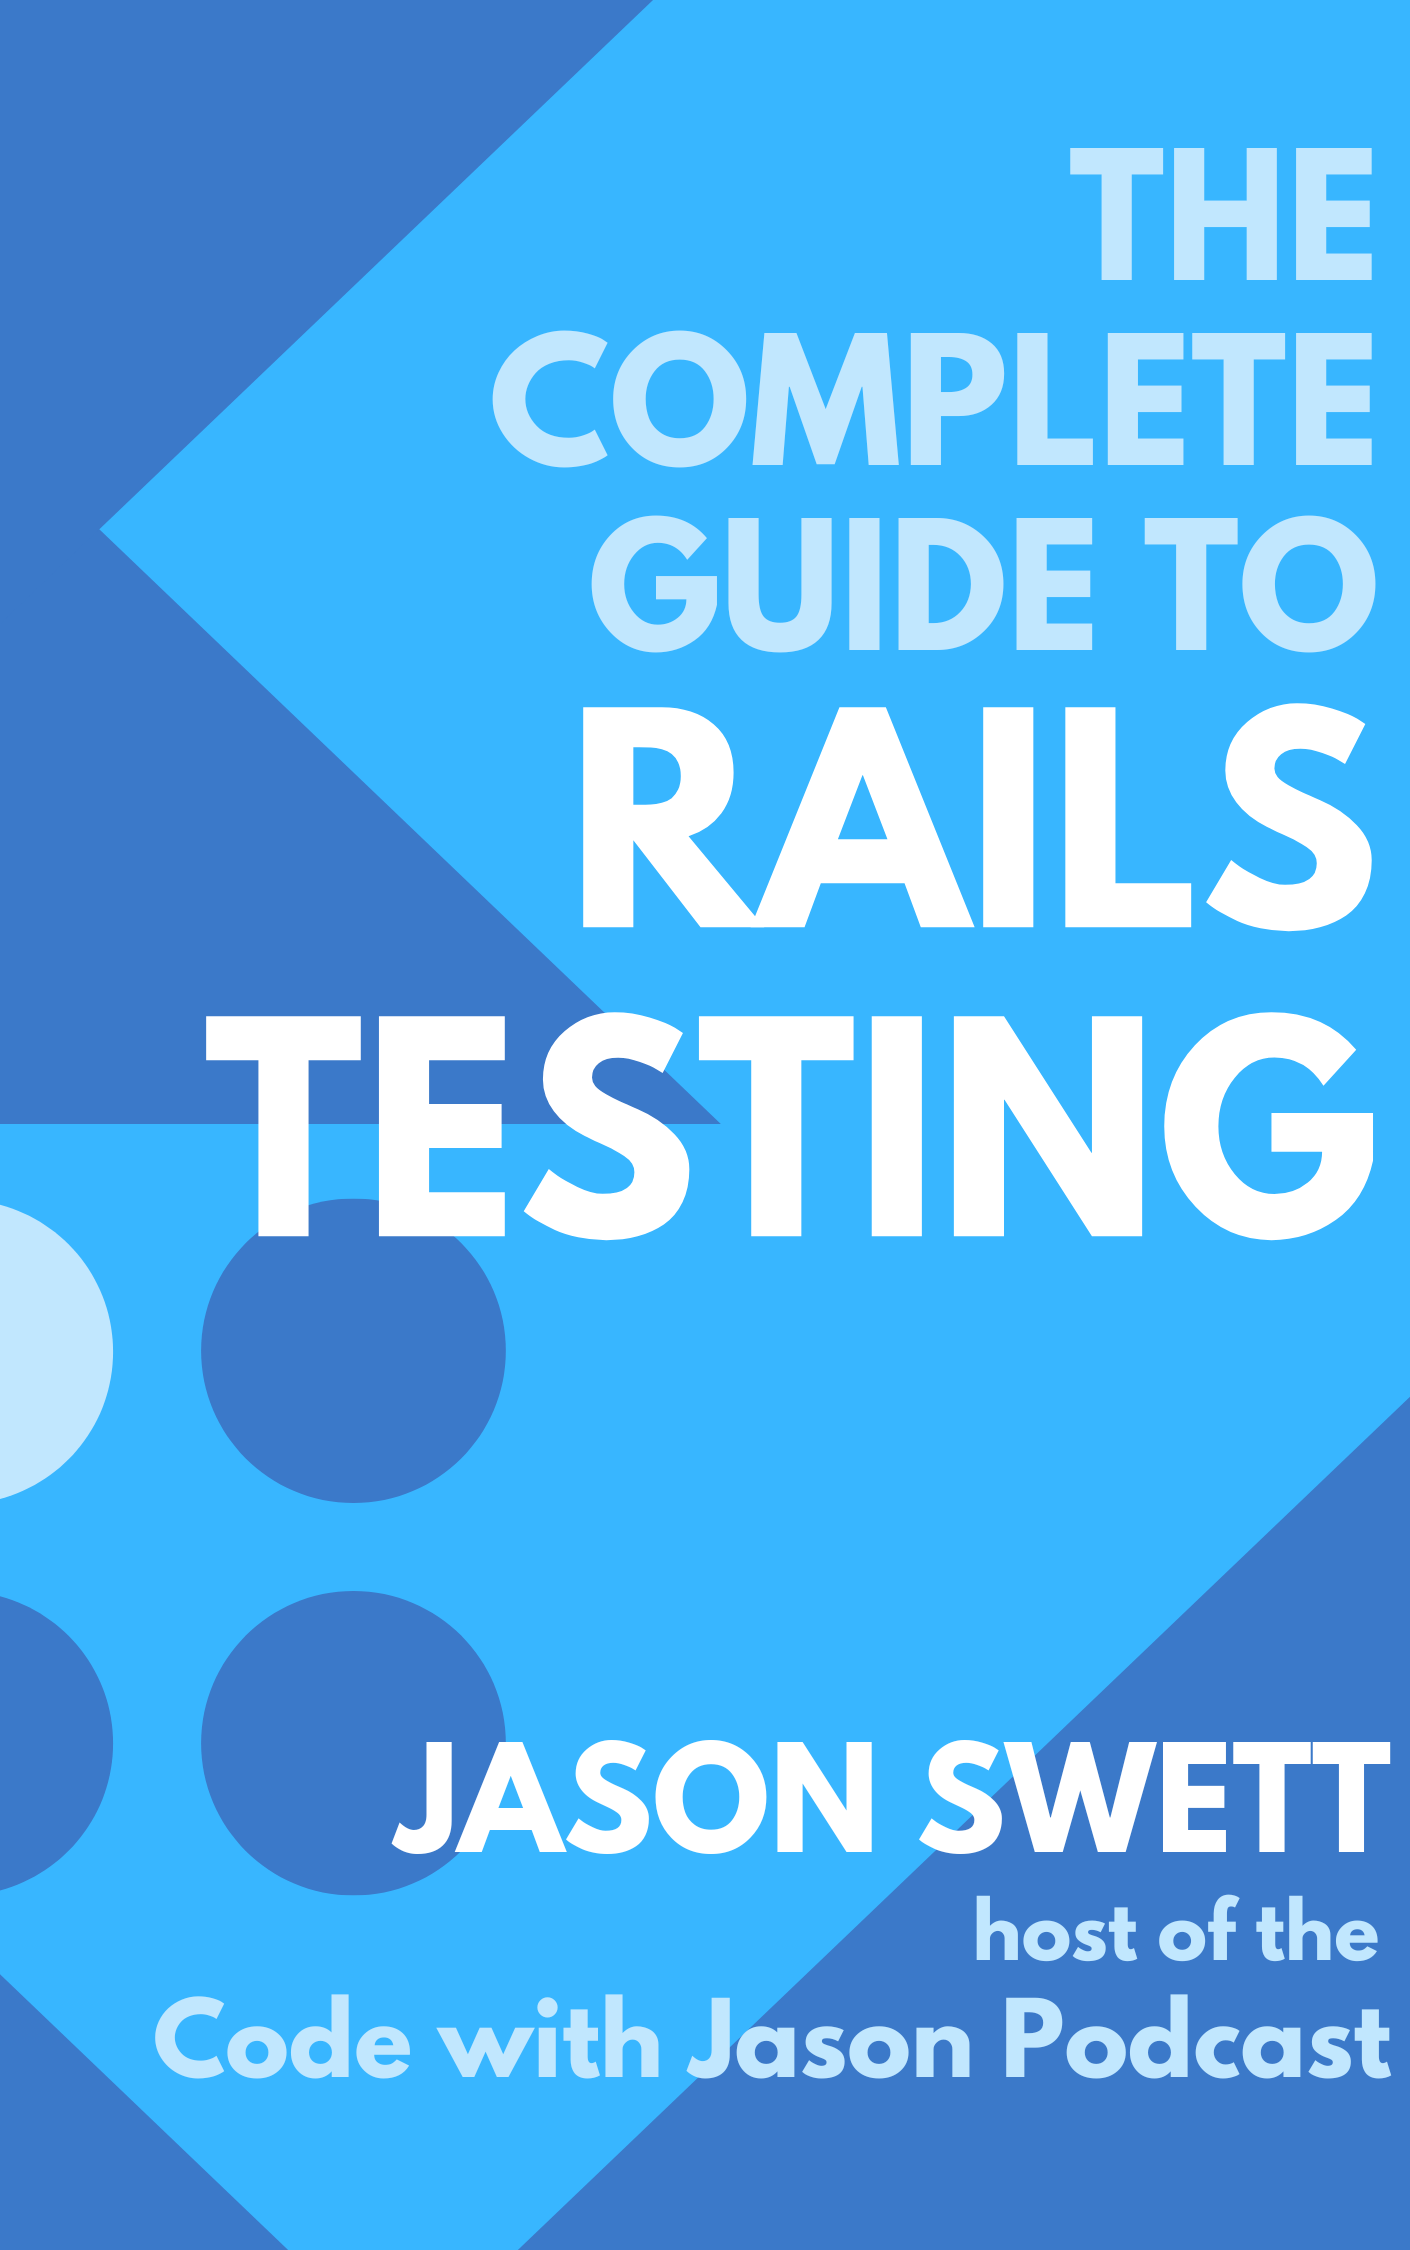 The Complete Guide to Rails Testing